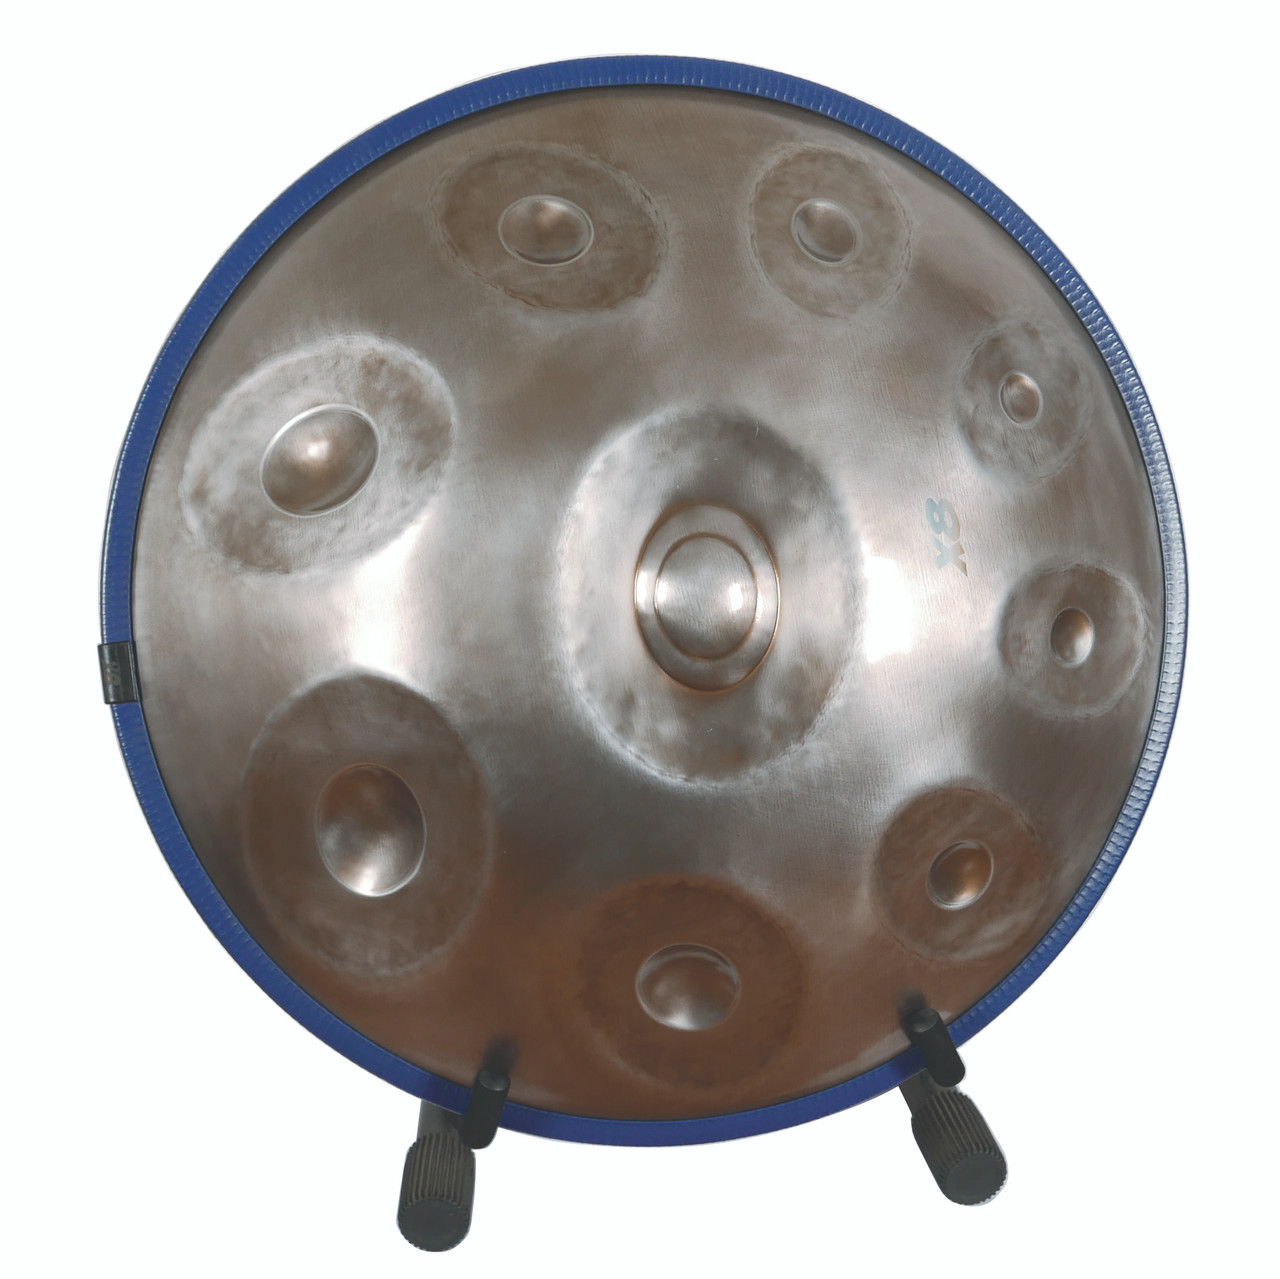 X8 Pro Handpan E Pakmoon, Stainless Steel with Hard Case (X8HPE) - X8 Drums